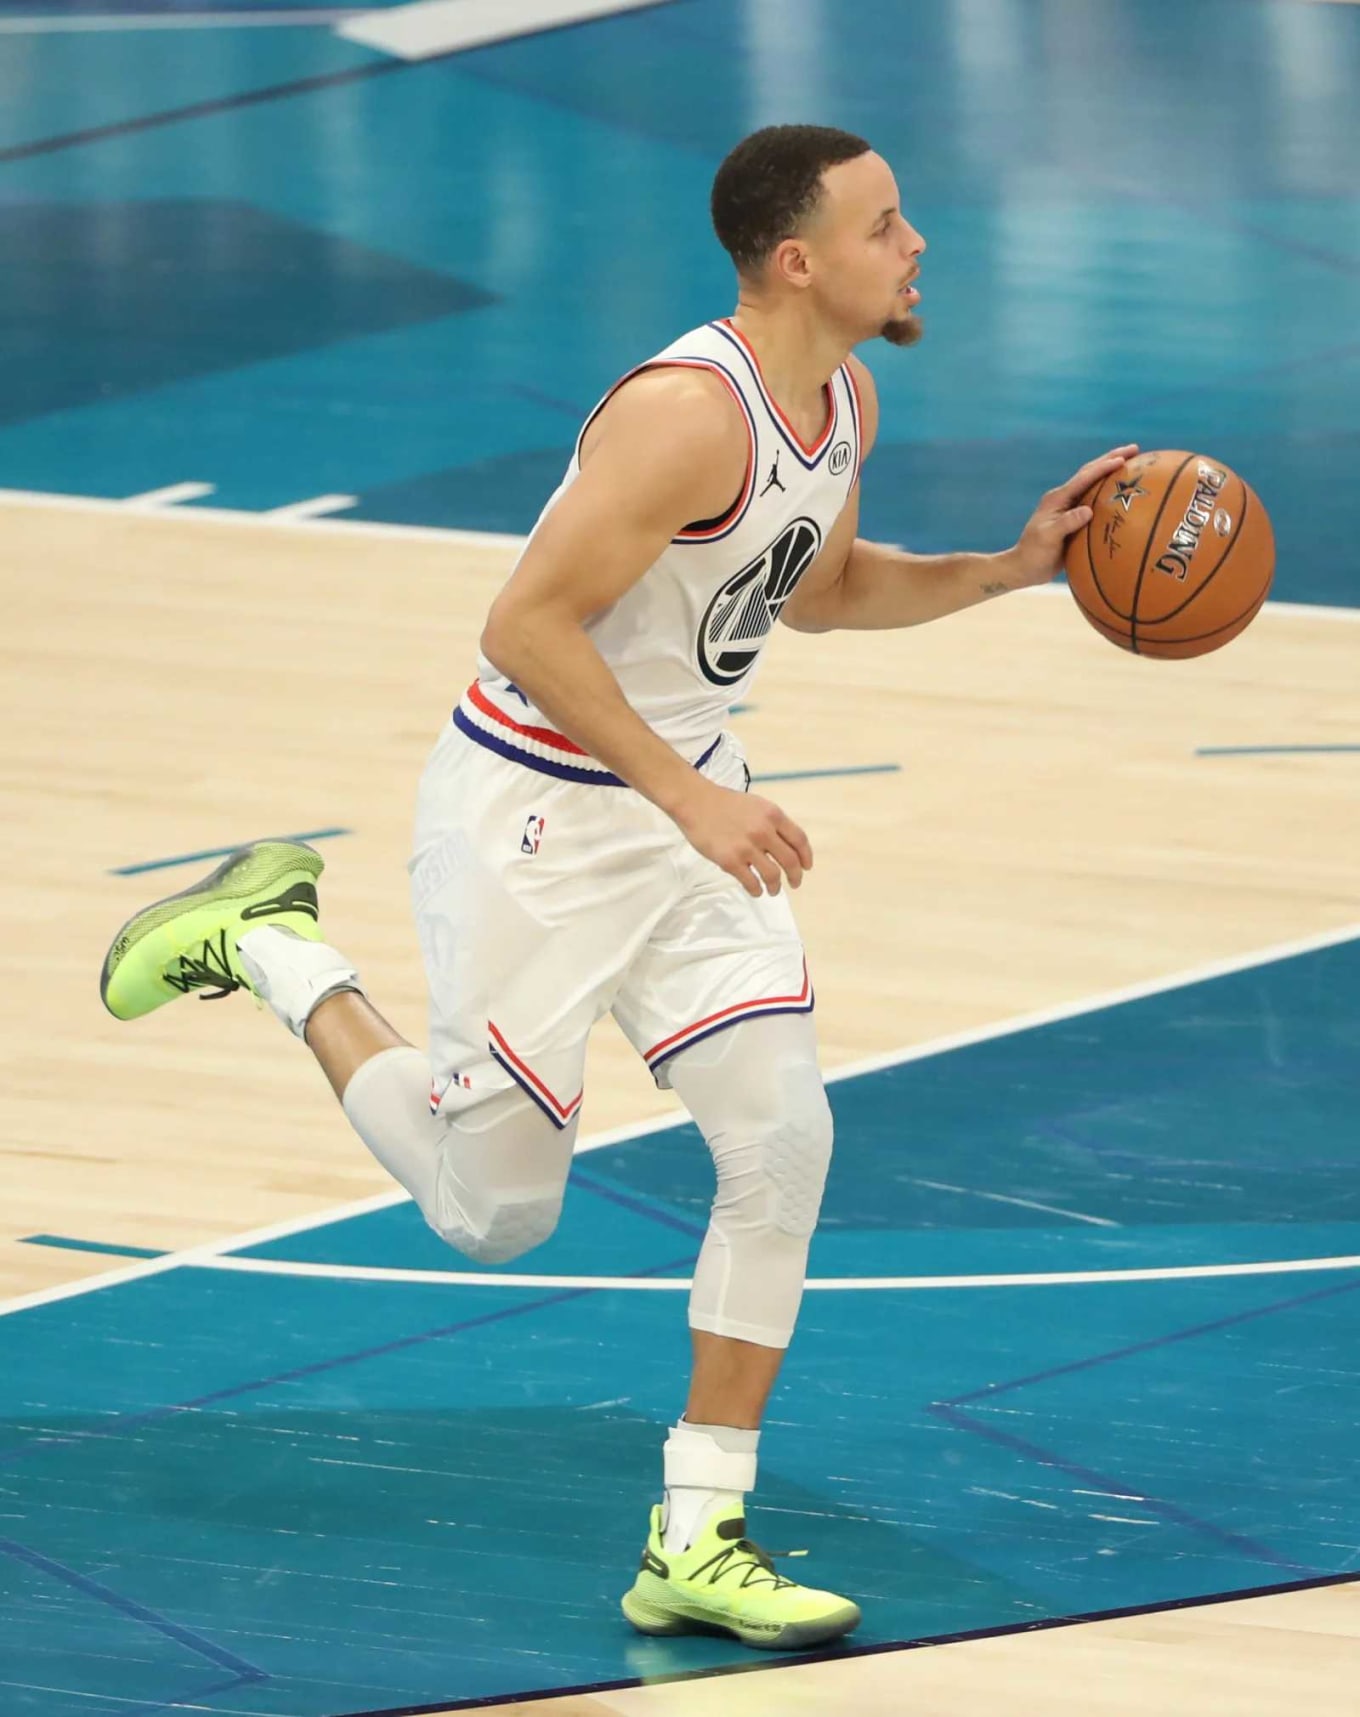 curry 6 on court